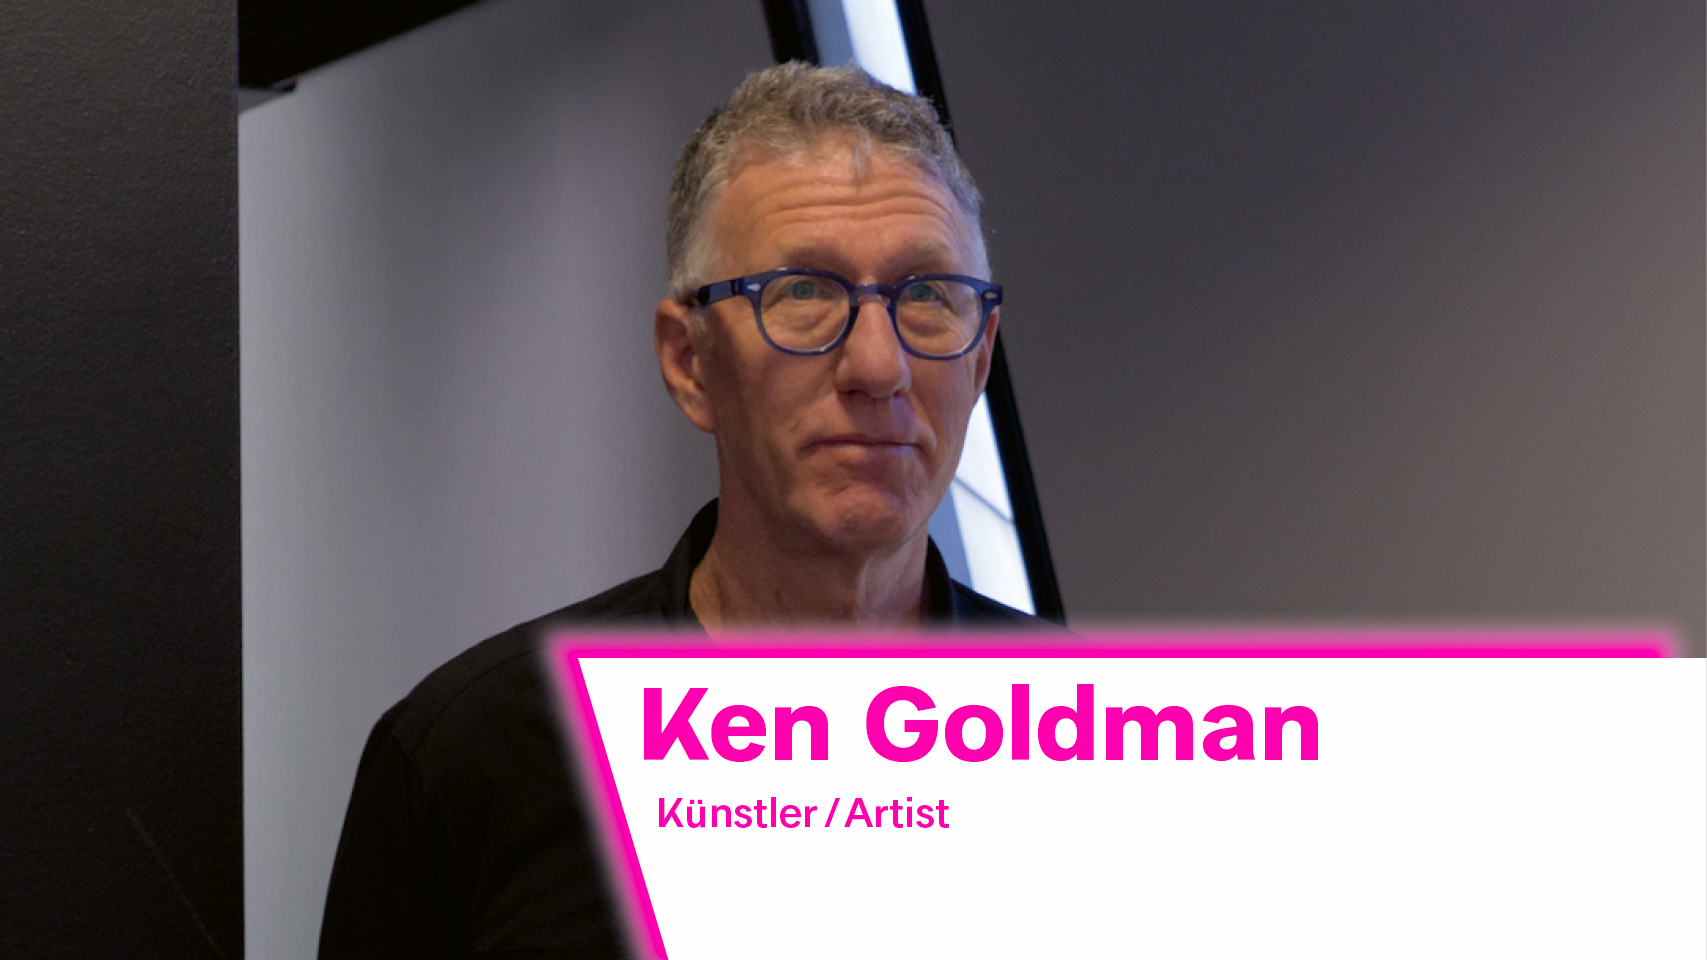 The image shows artist Ken Goldman. He is wearing a black shirt and glasses.